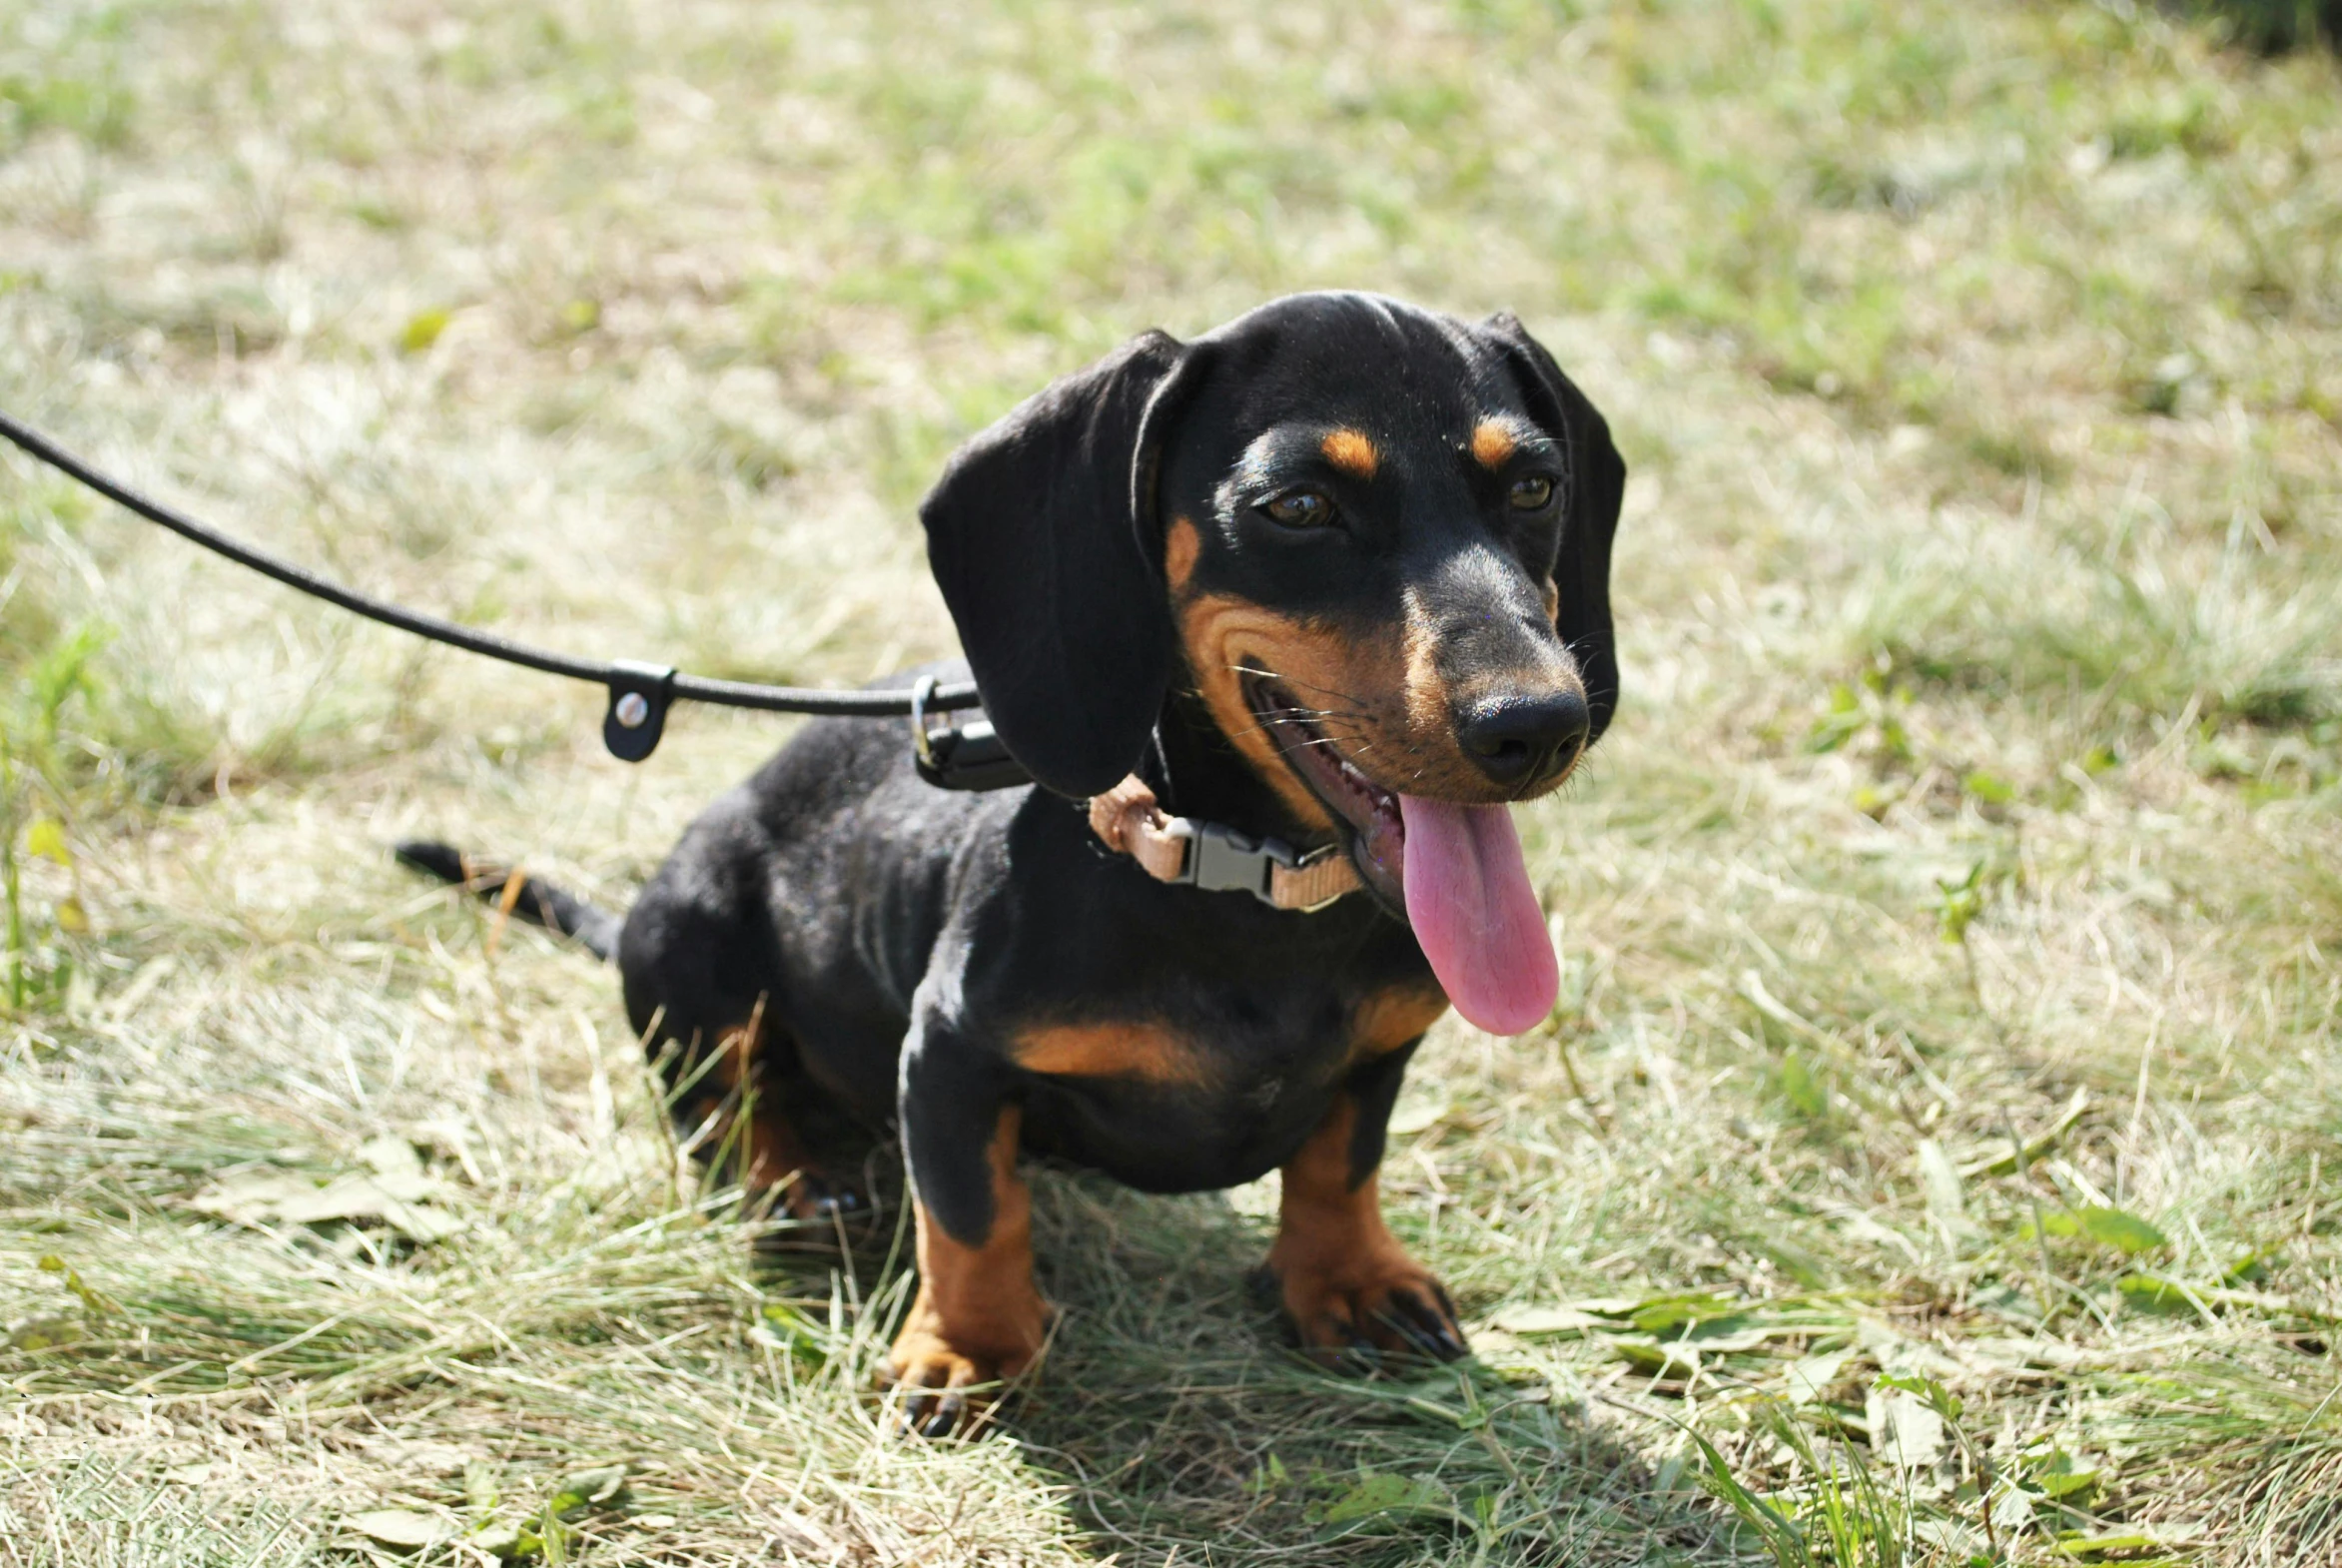 a small black and brown dog on a leash, dachshund, 2019 trending photo, warm weather, hip-length